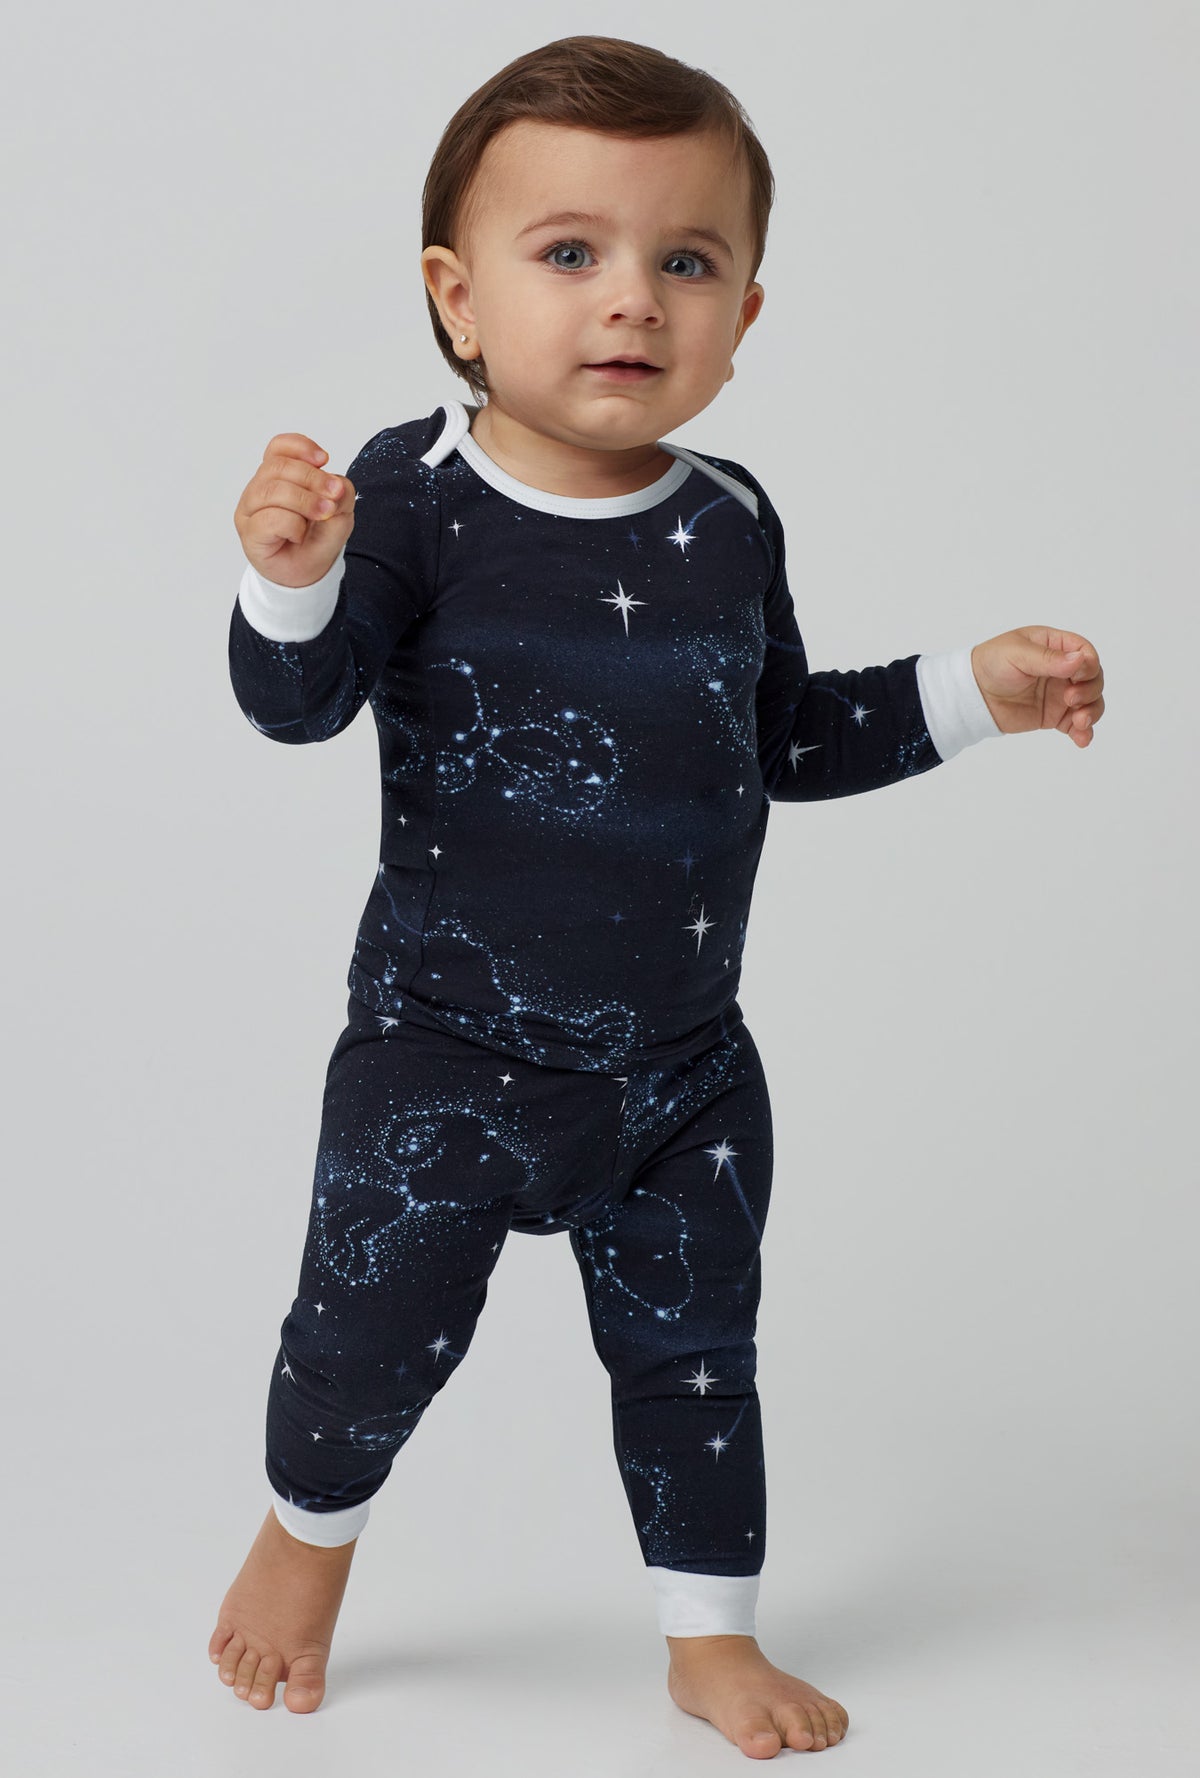 A baby wearing black long sleeve stretch jersey boo boo pj set with celestial snoopy print.